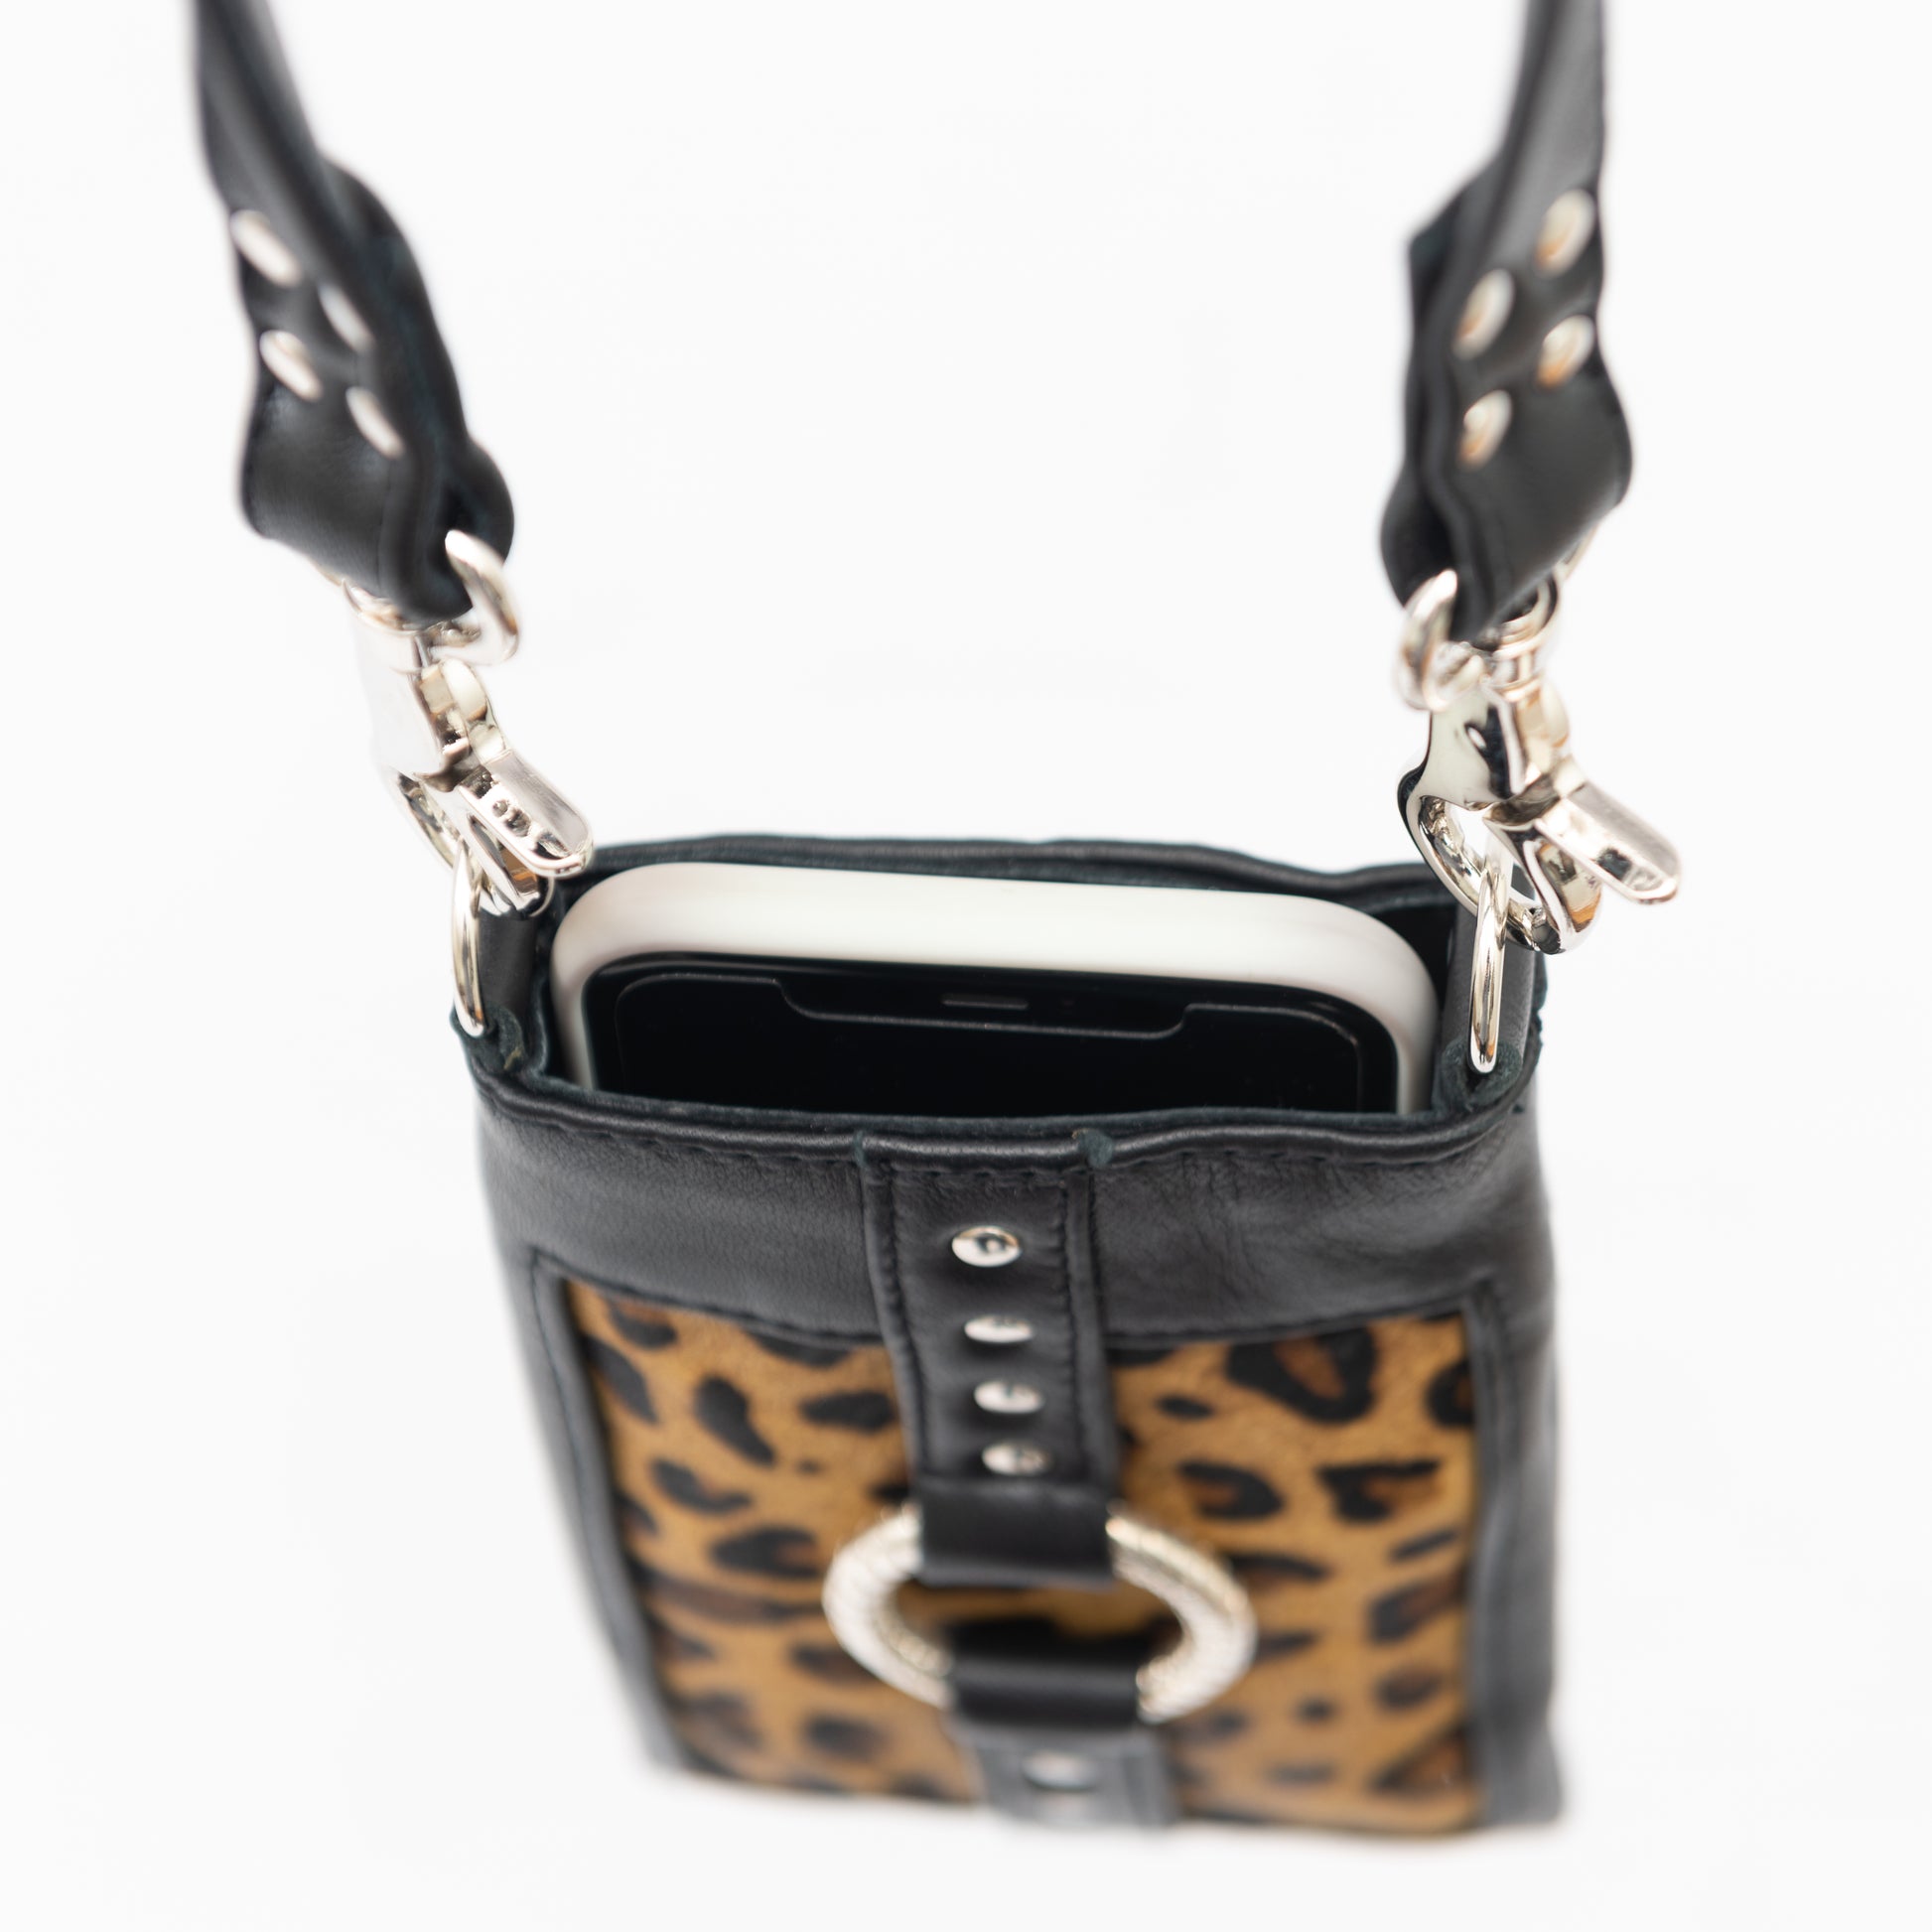 leopard print crossbody mobile phone holster bag with adjustable shoulder strap and leopard print cow hide, hand made designer iPhone pouch.  